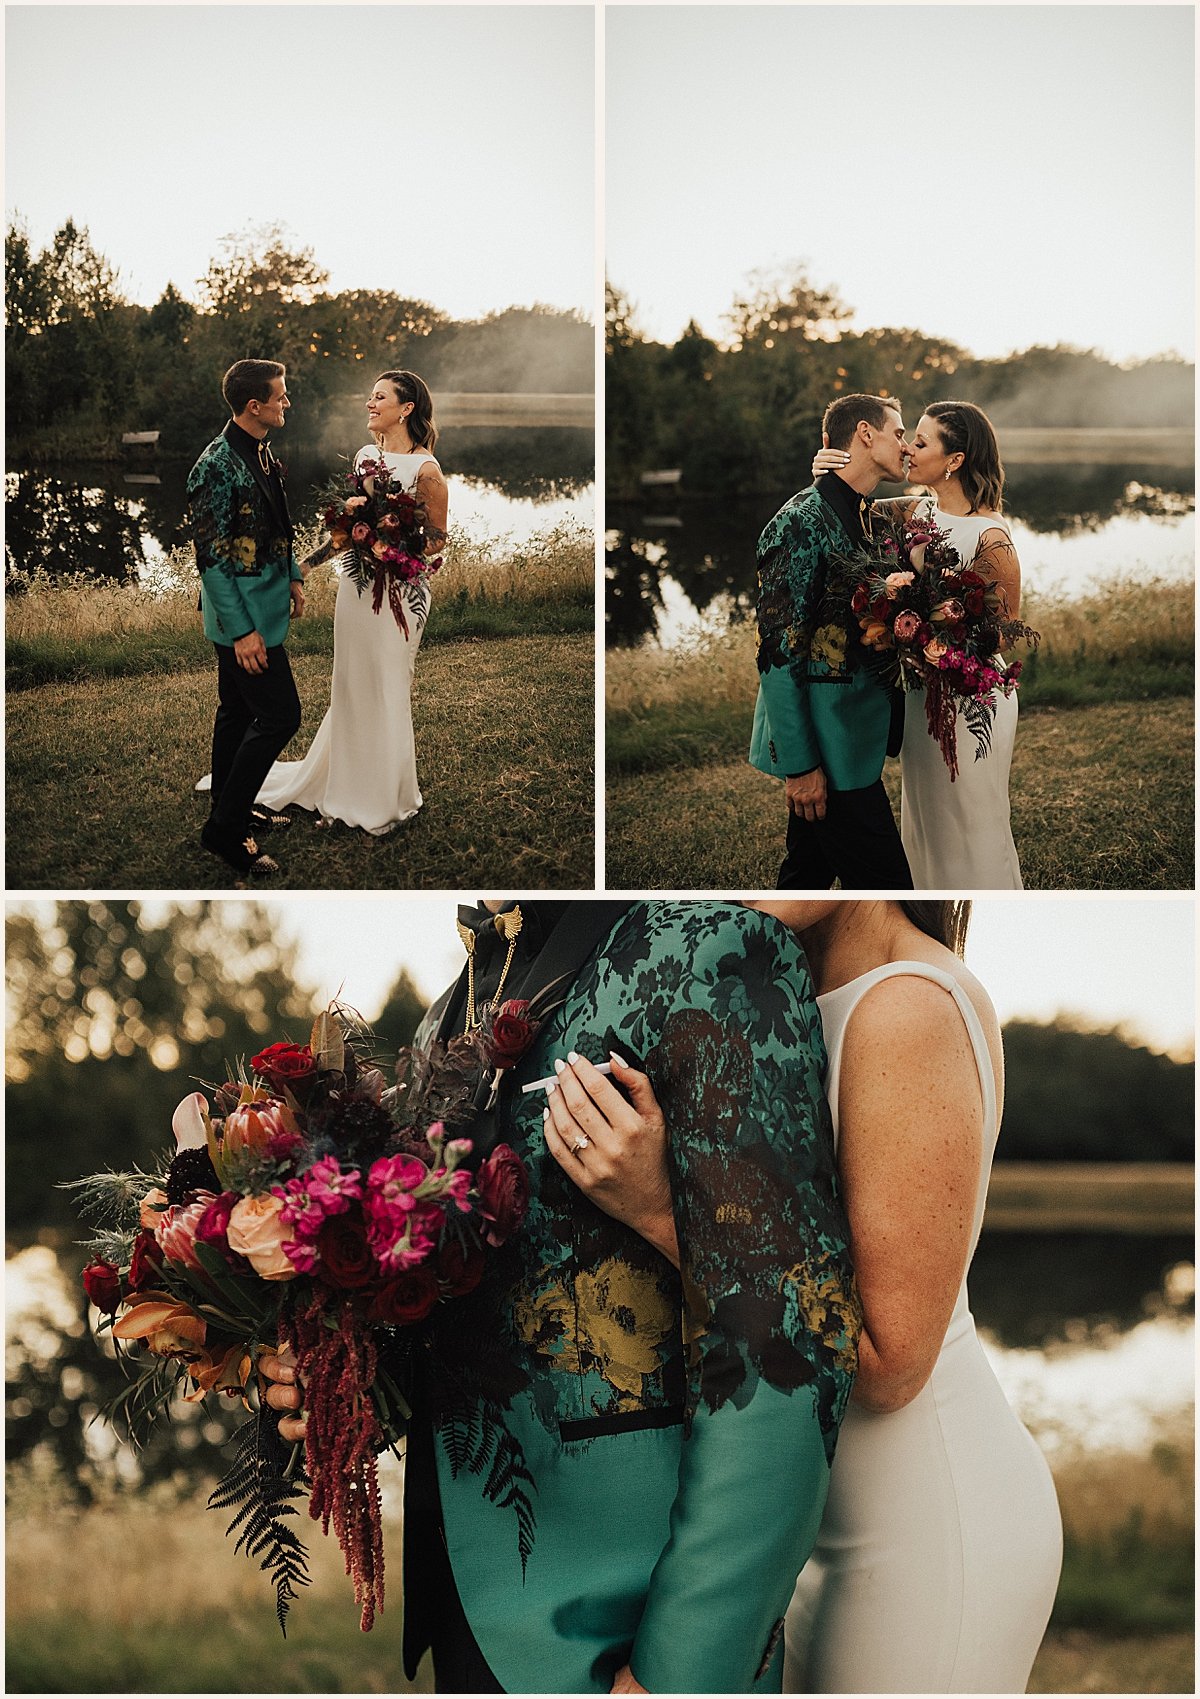 Bride and Groom Portraits at Festival Themed Wedding in Austin, Texas | Texas Luxury Wedding Photographer | Lauren Parr Photography